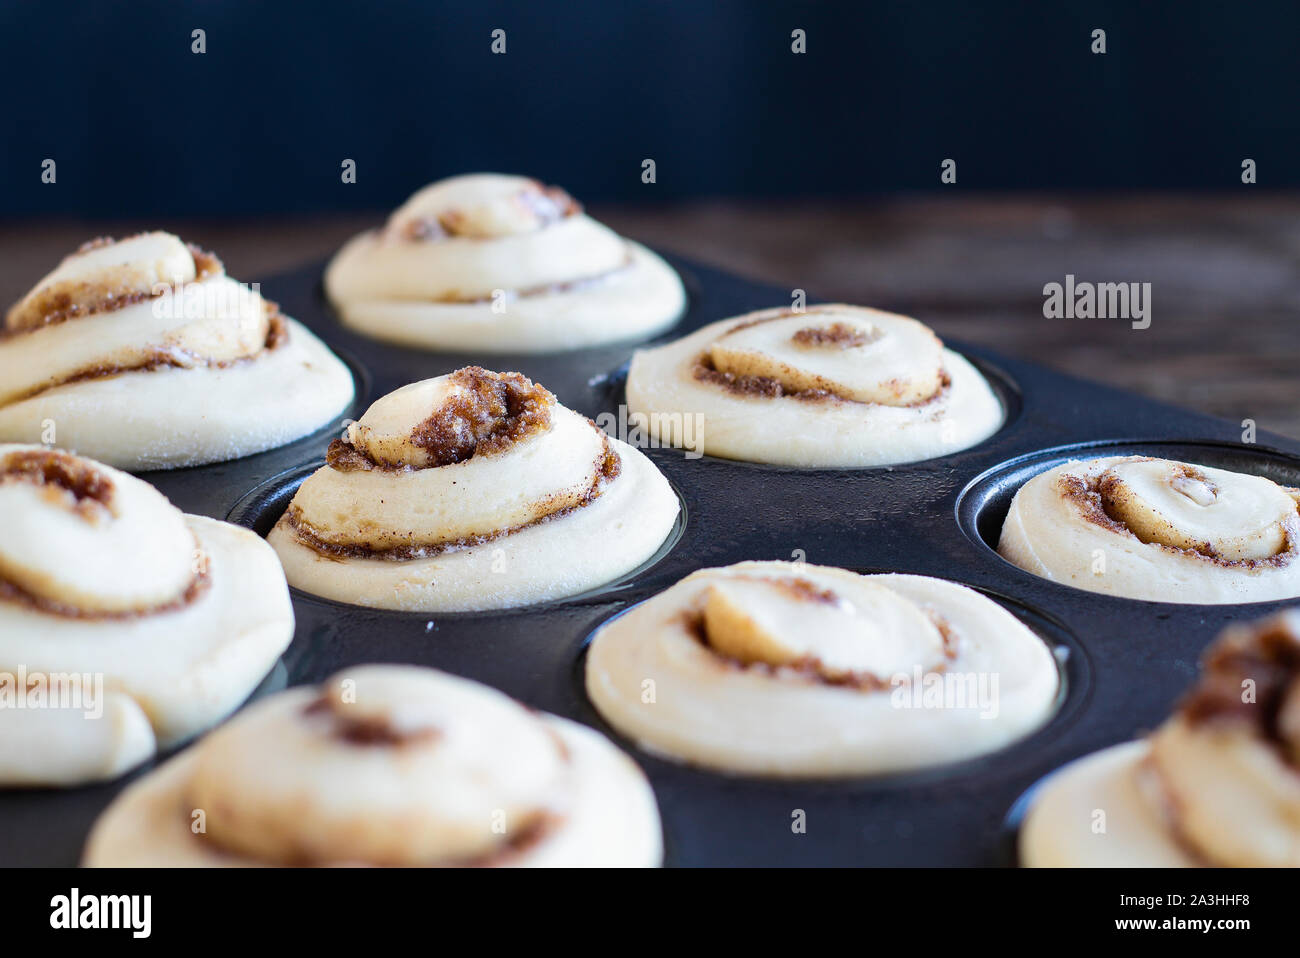 Homemade tall cinnamon roll rising in a muffin tin. Selective focus on center with blurred foreground and background. Stock Photo